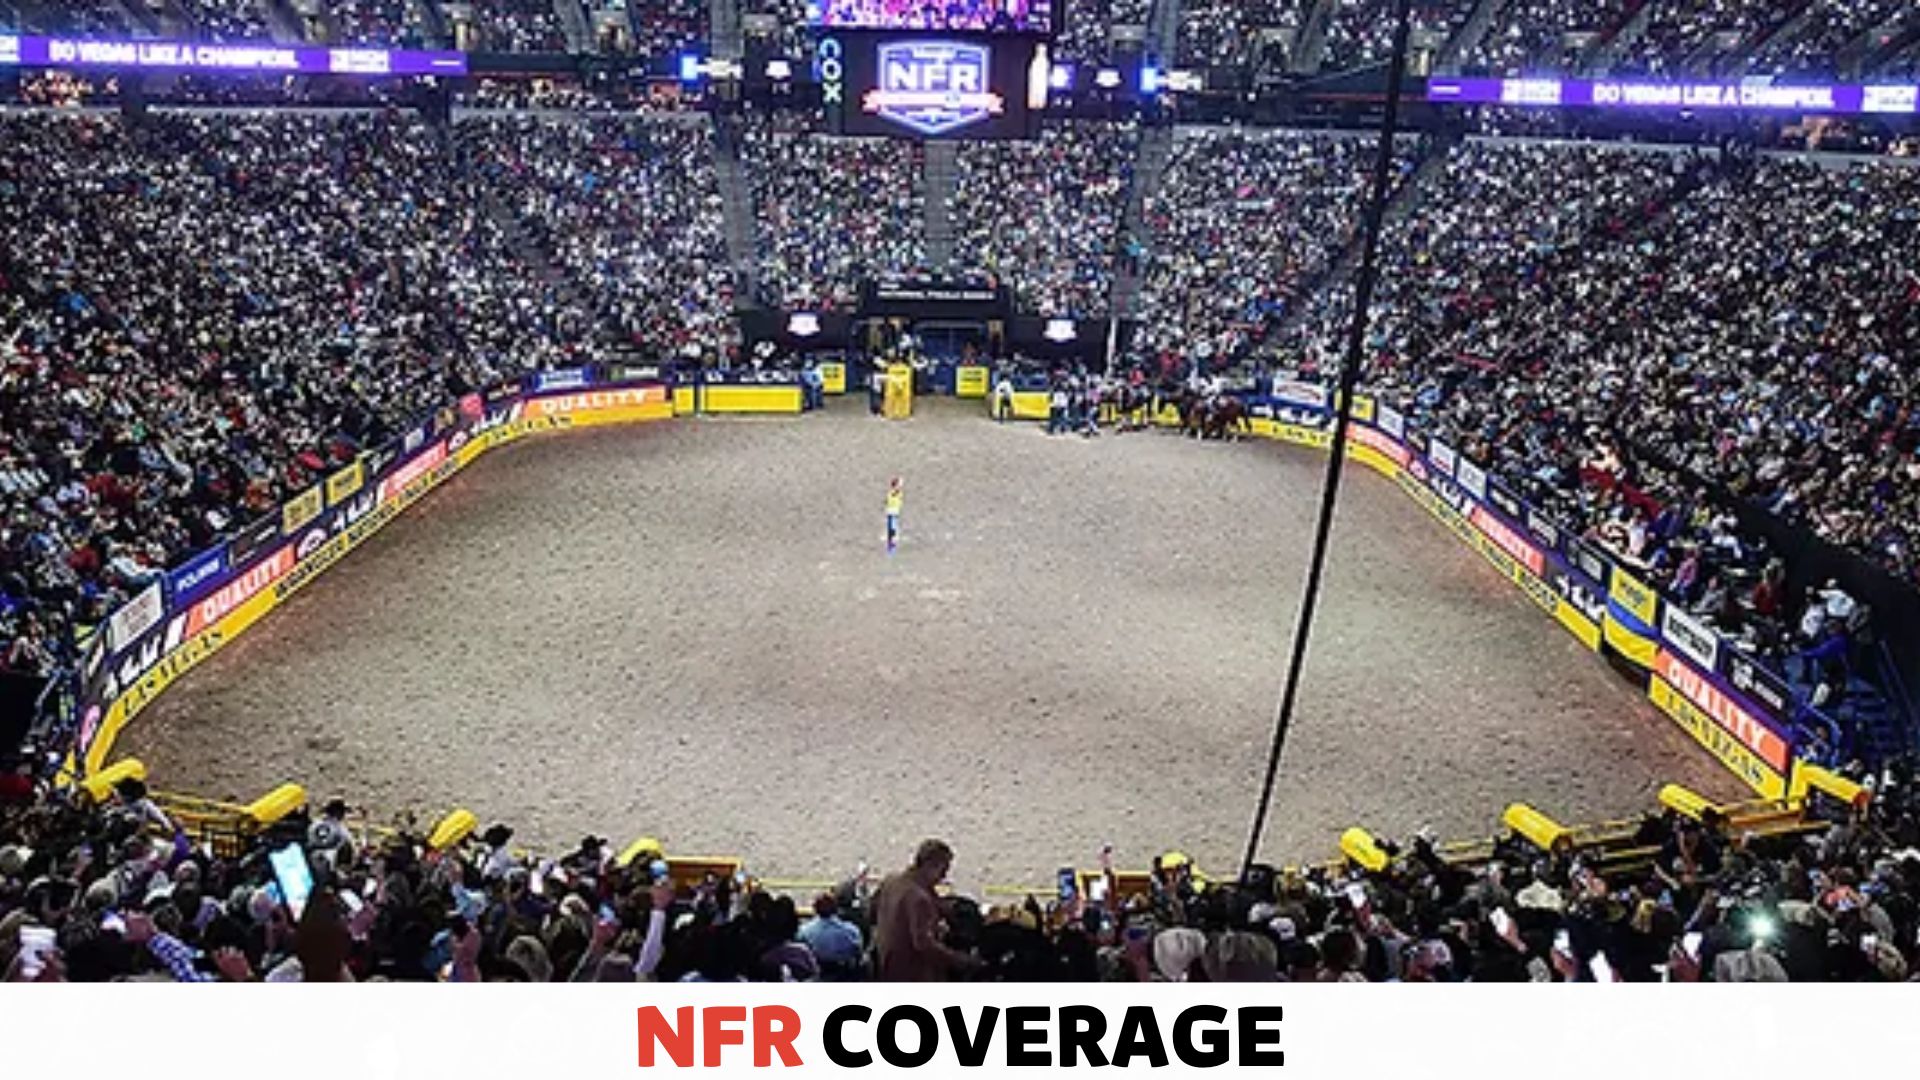 Exclusive Offers for NFR Fans: Deals You Can’t Find Anywhere Else